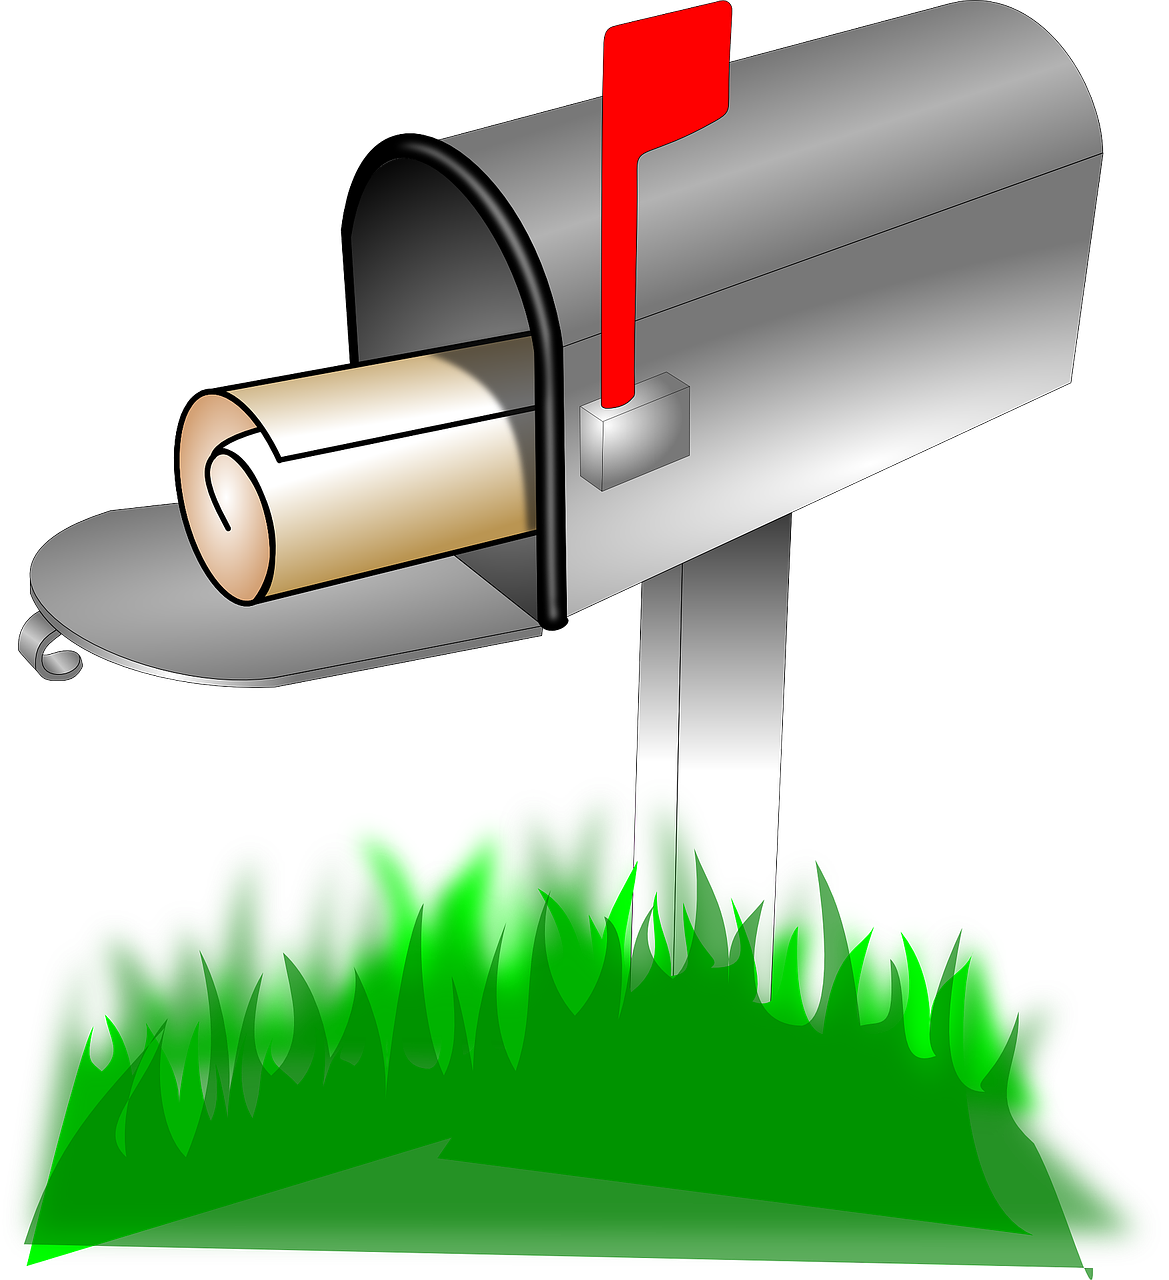 mailbox,postal,box,mail,letter,post,delivery,postbox,letterbox,free vector graphics,free pictures, free photos, free images, royalty free, free illustrations, public domain